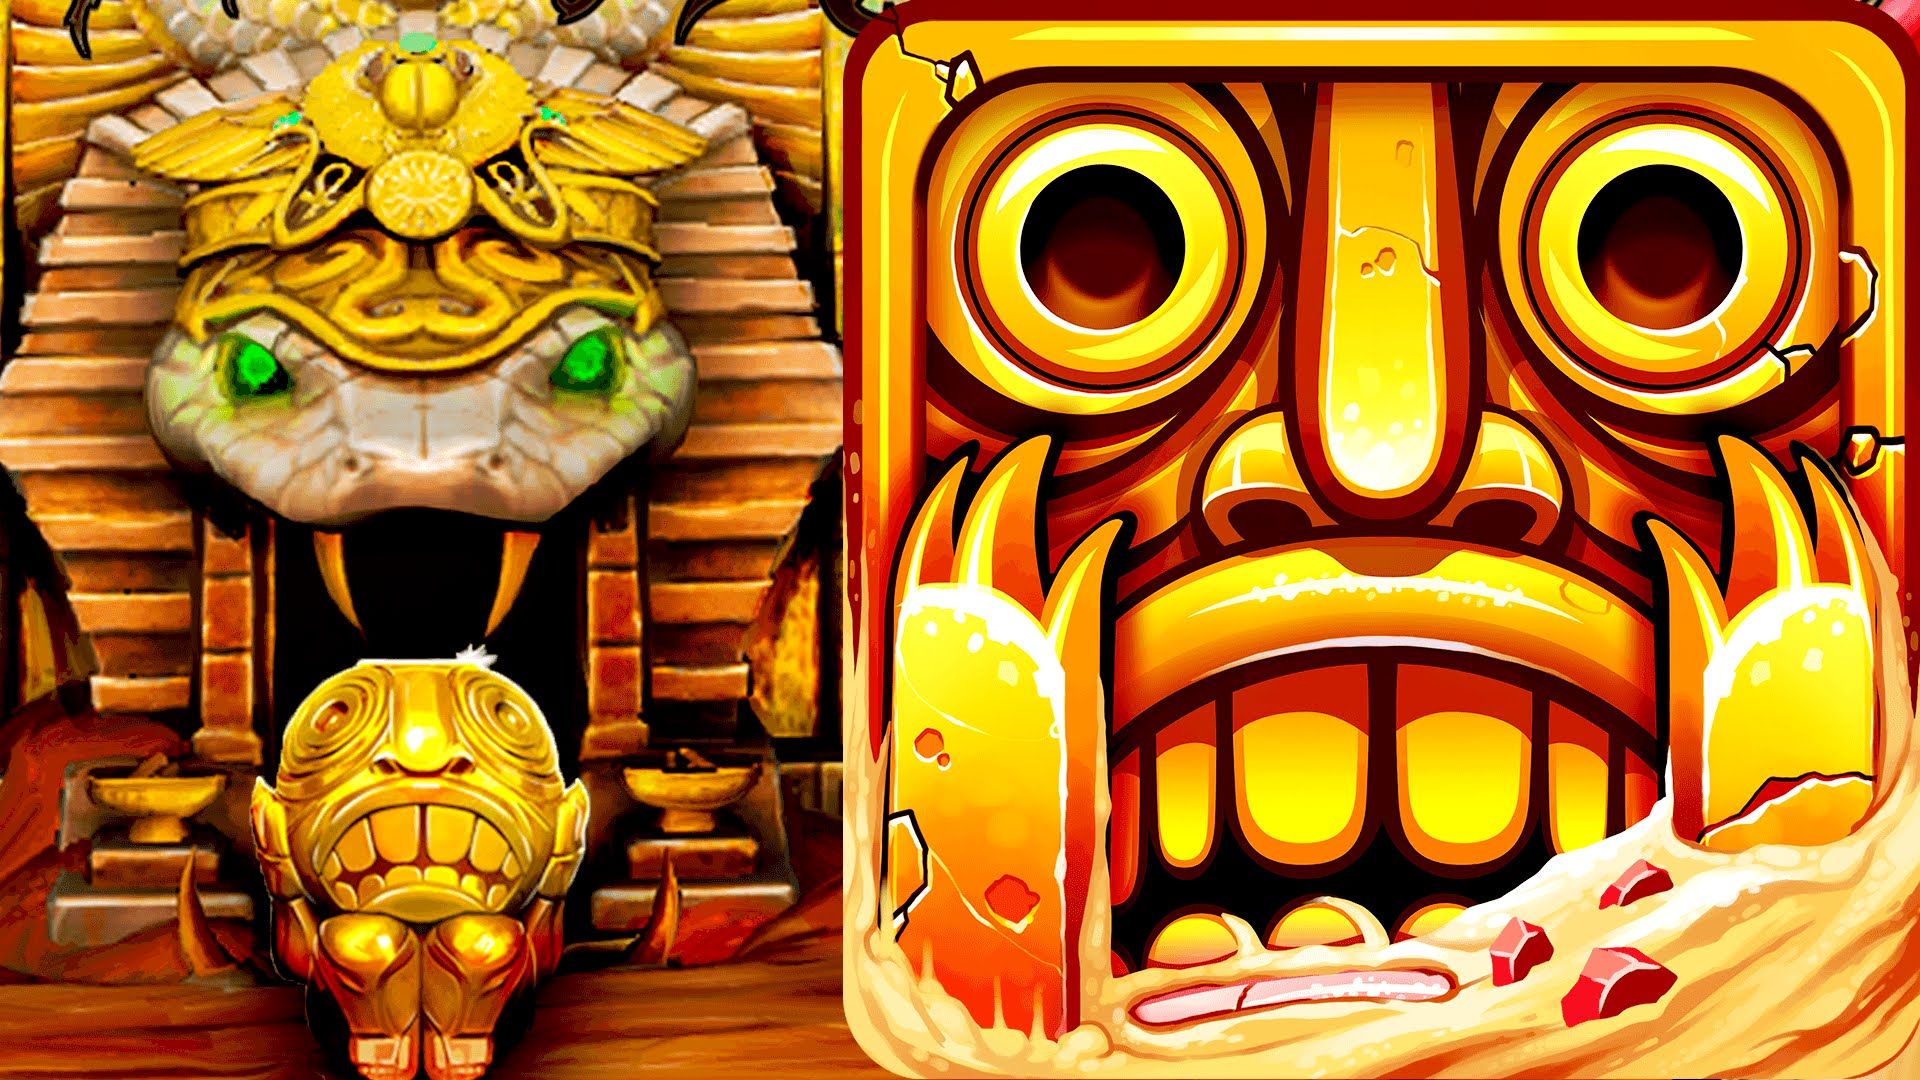 Temple Run 2 Hd, Download Wallpapers on Jakpost.travel.